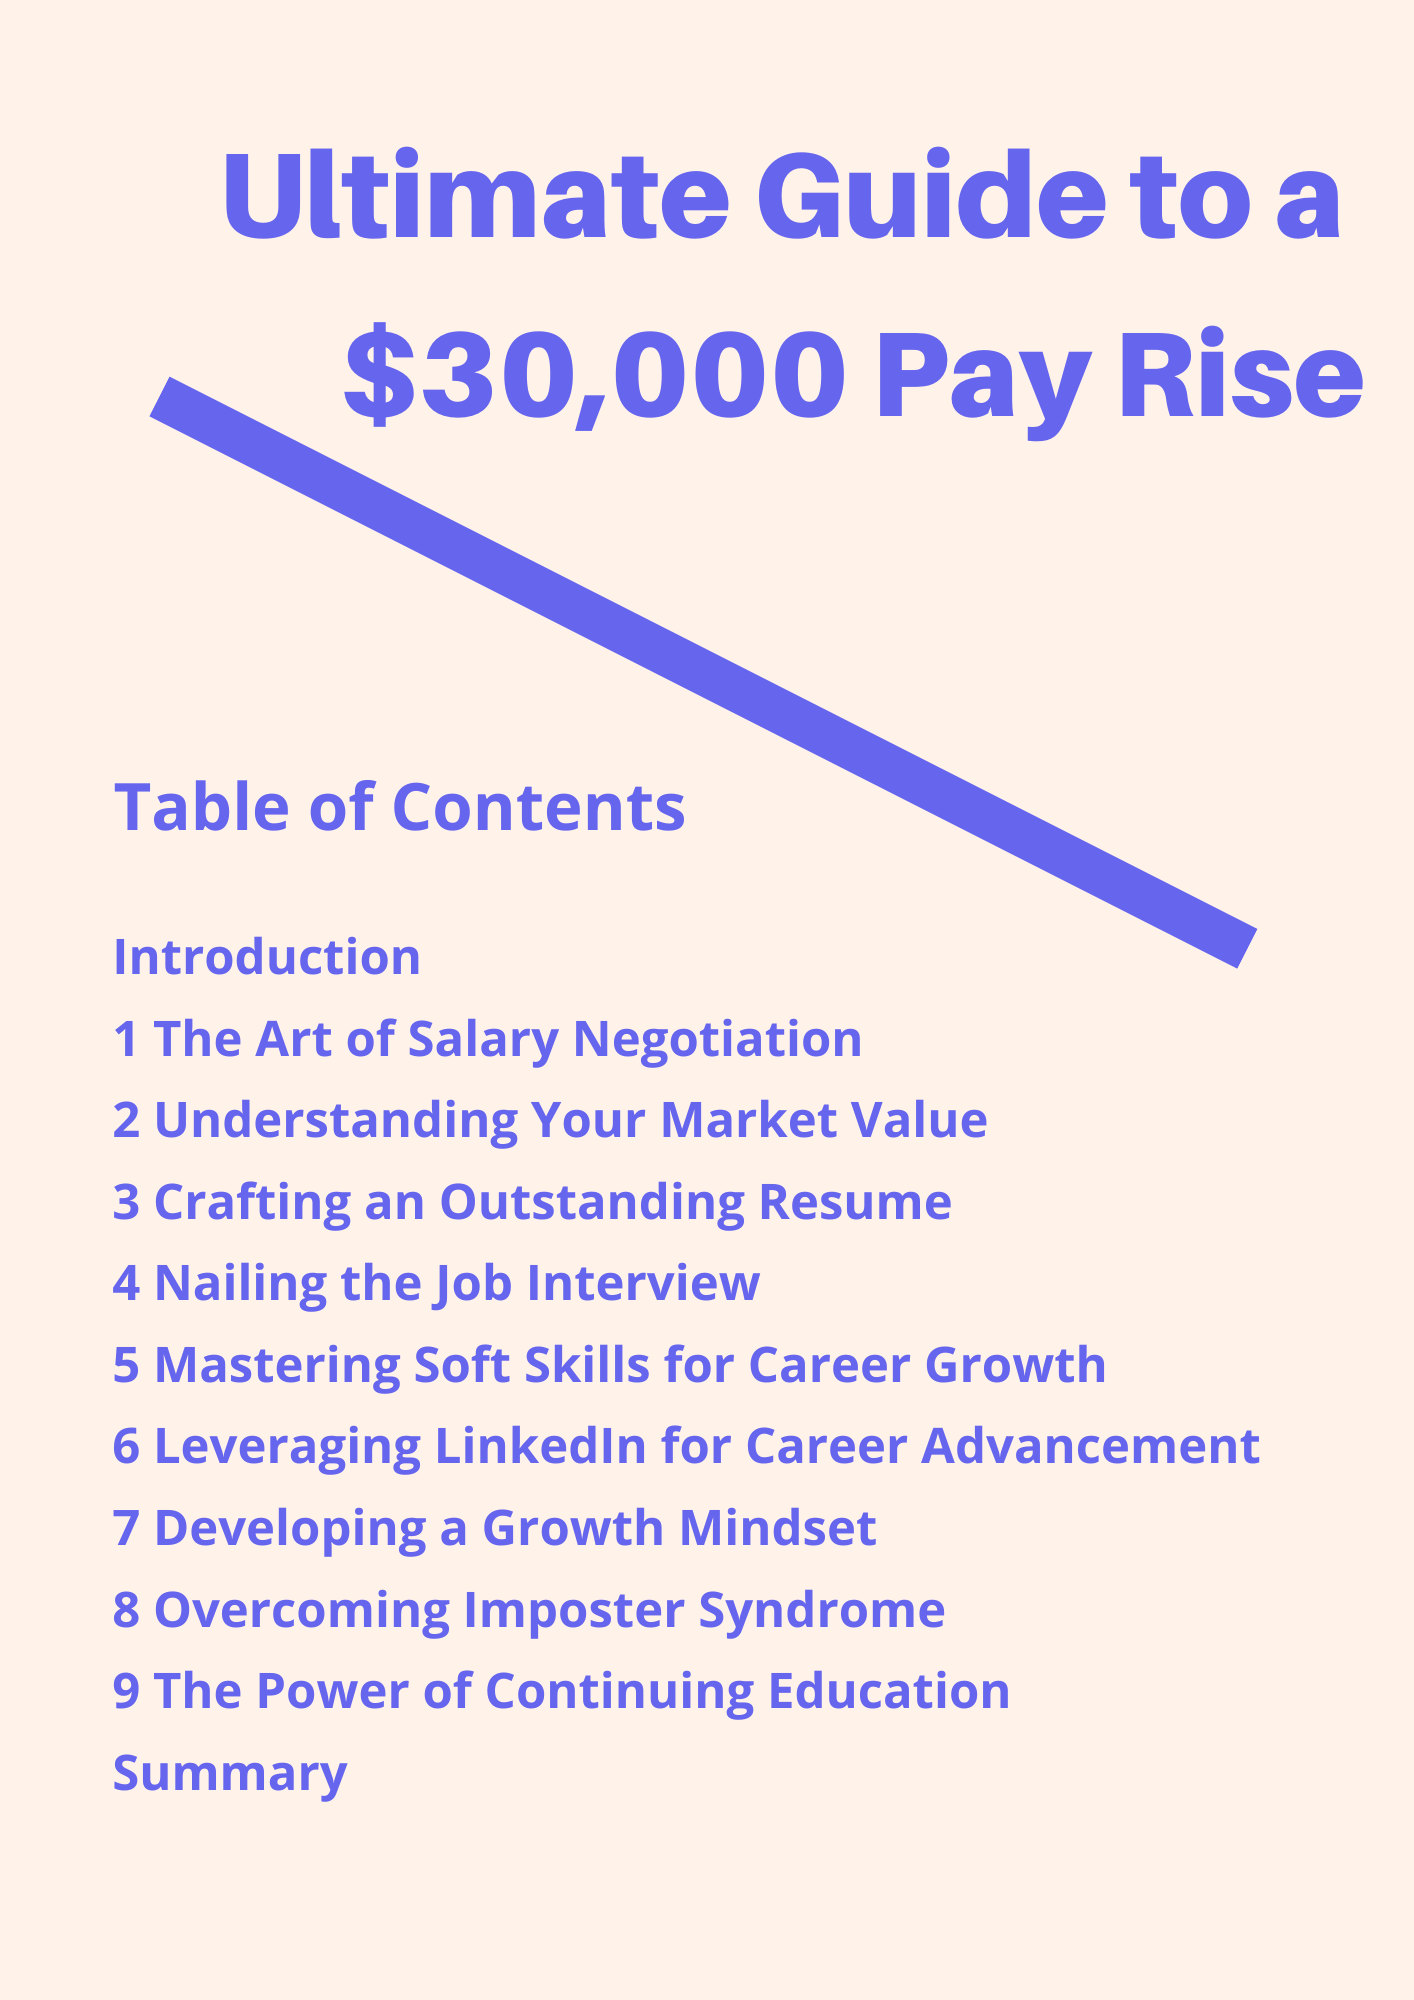 Ultimate Guide to a $30,000 Pay Rise - FREE COACHING CALL INCLUDED